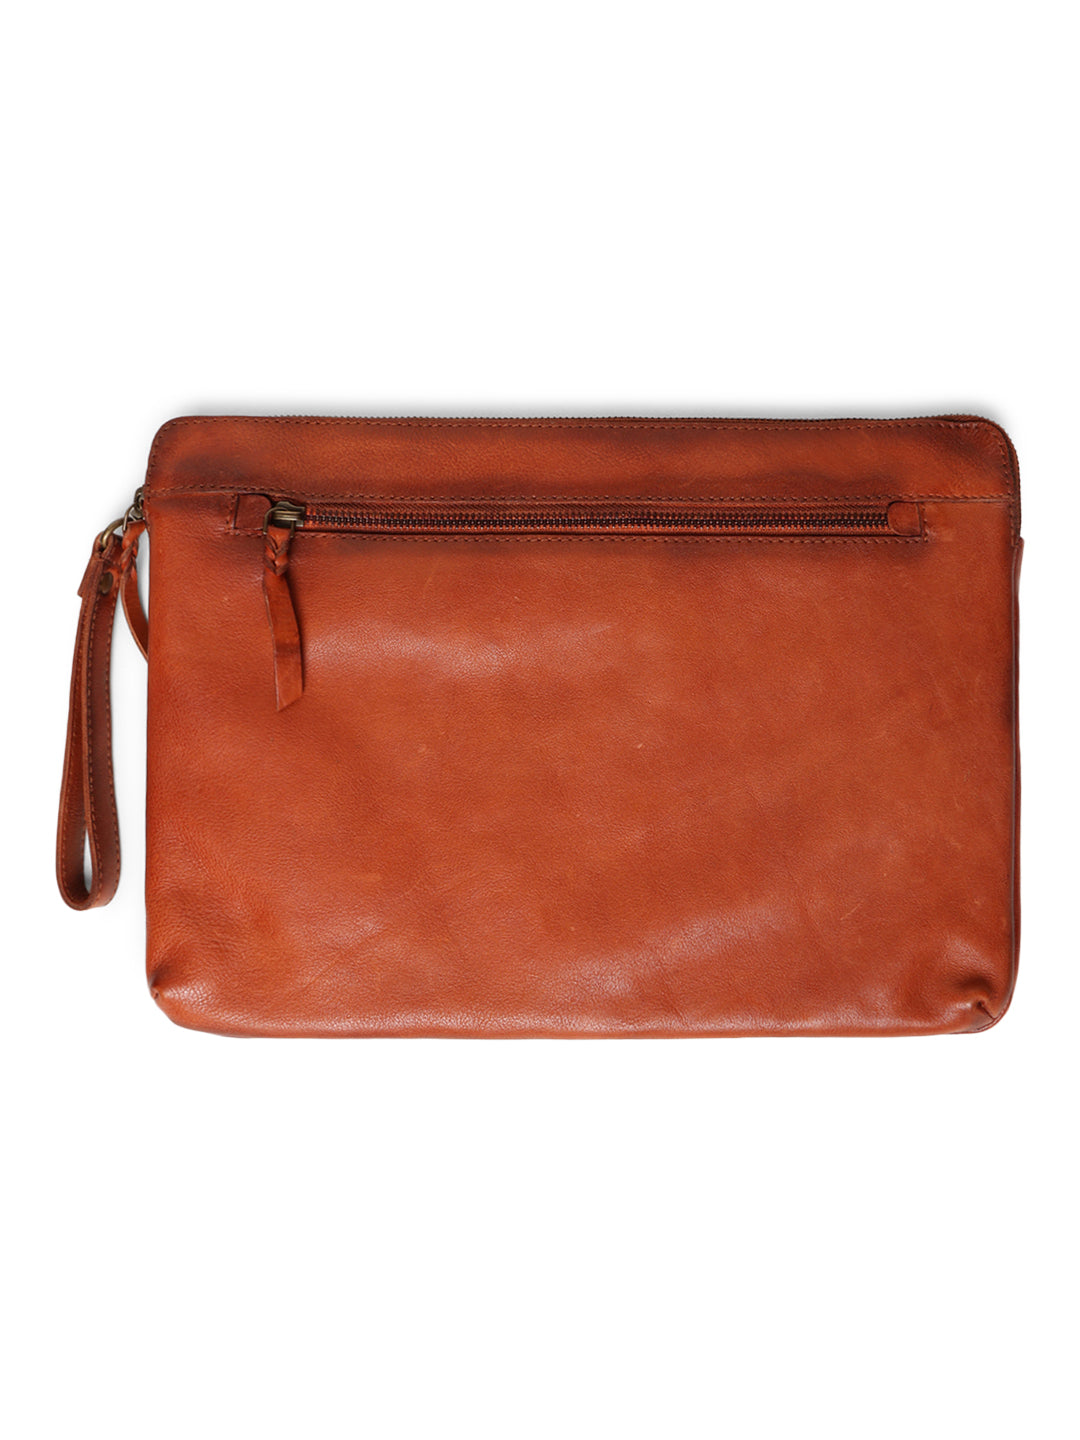 Timeless Protection: Cognac Leather Laptop Sleeves